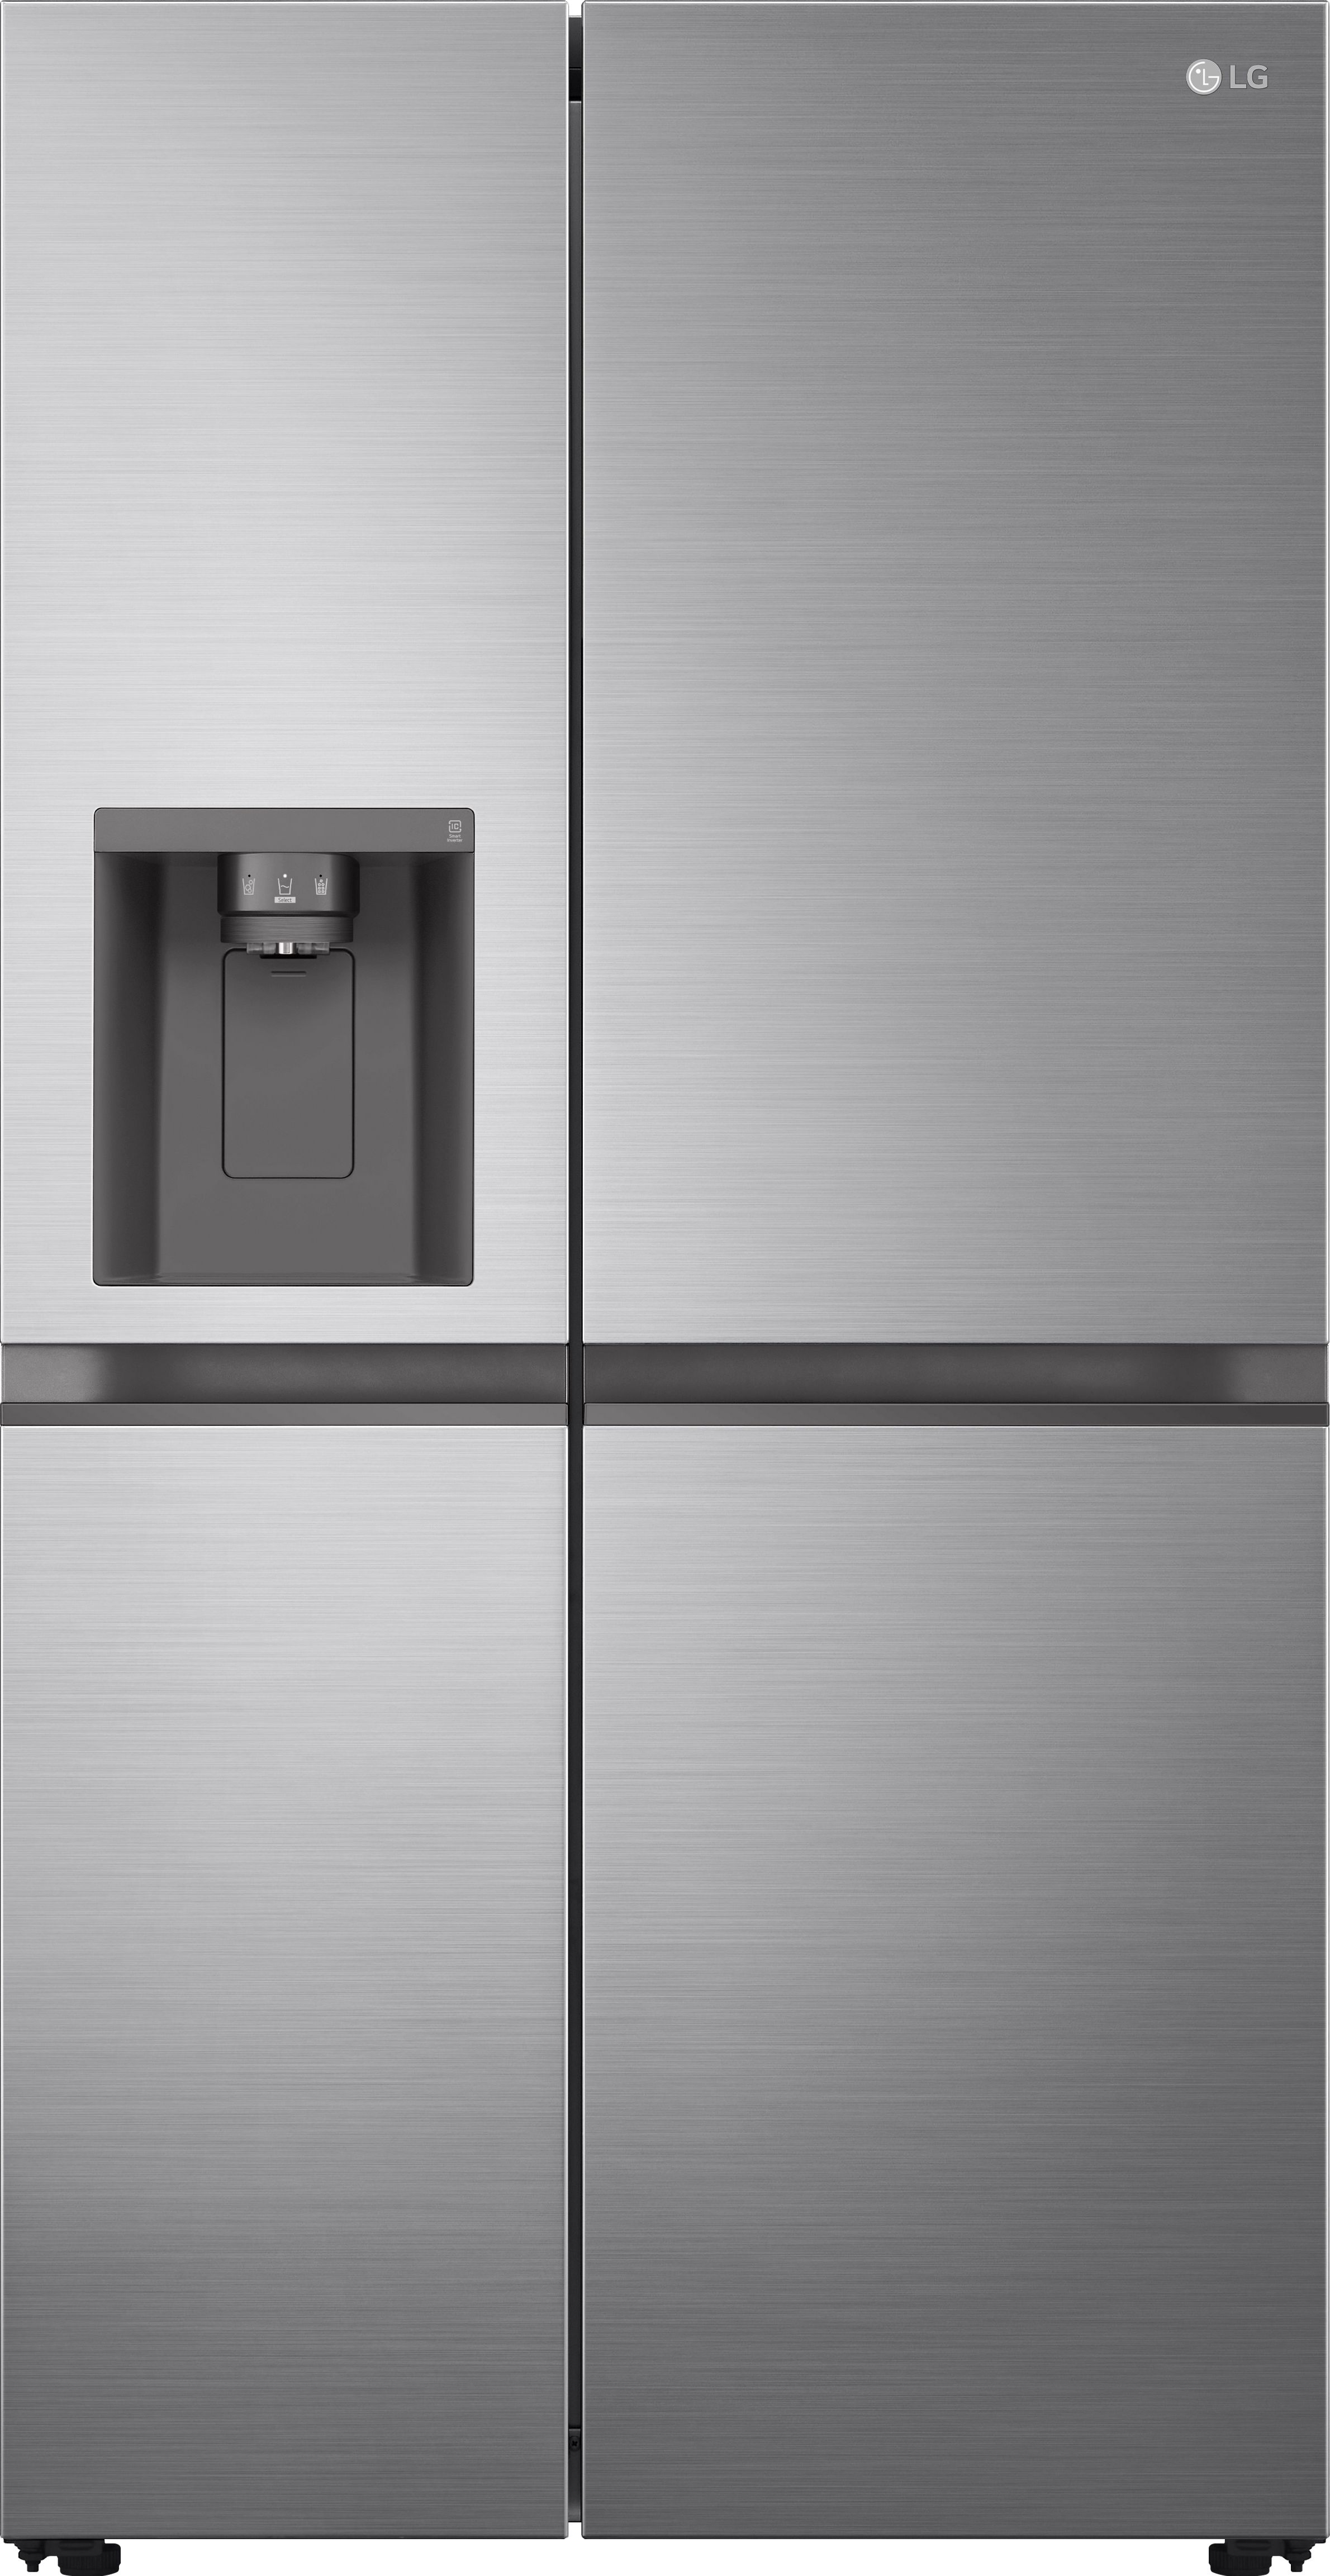 LG NatureFRESH GSLV51PZXL Non-Plumbed Frost Free American Fridge Freezer - Shiny Steel - E Rated, Silver